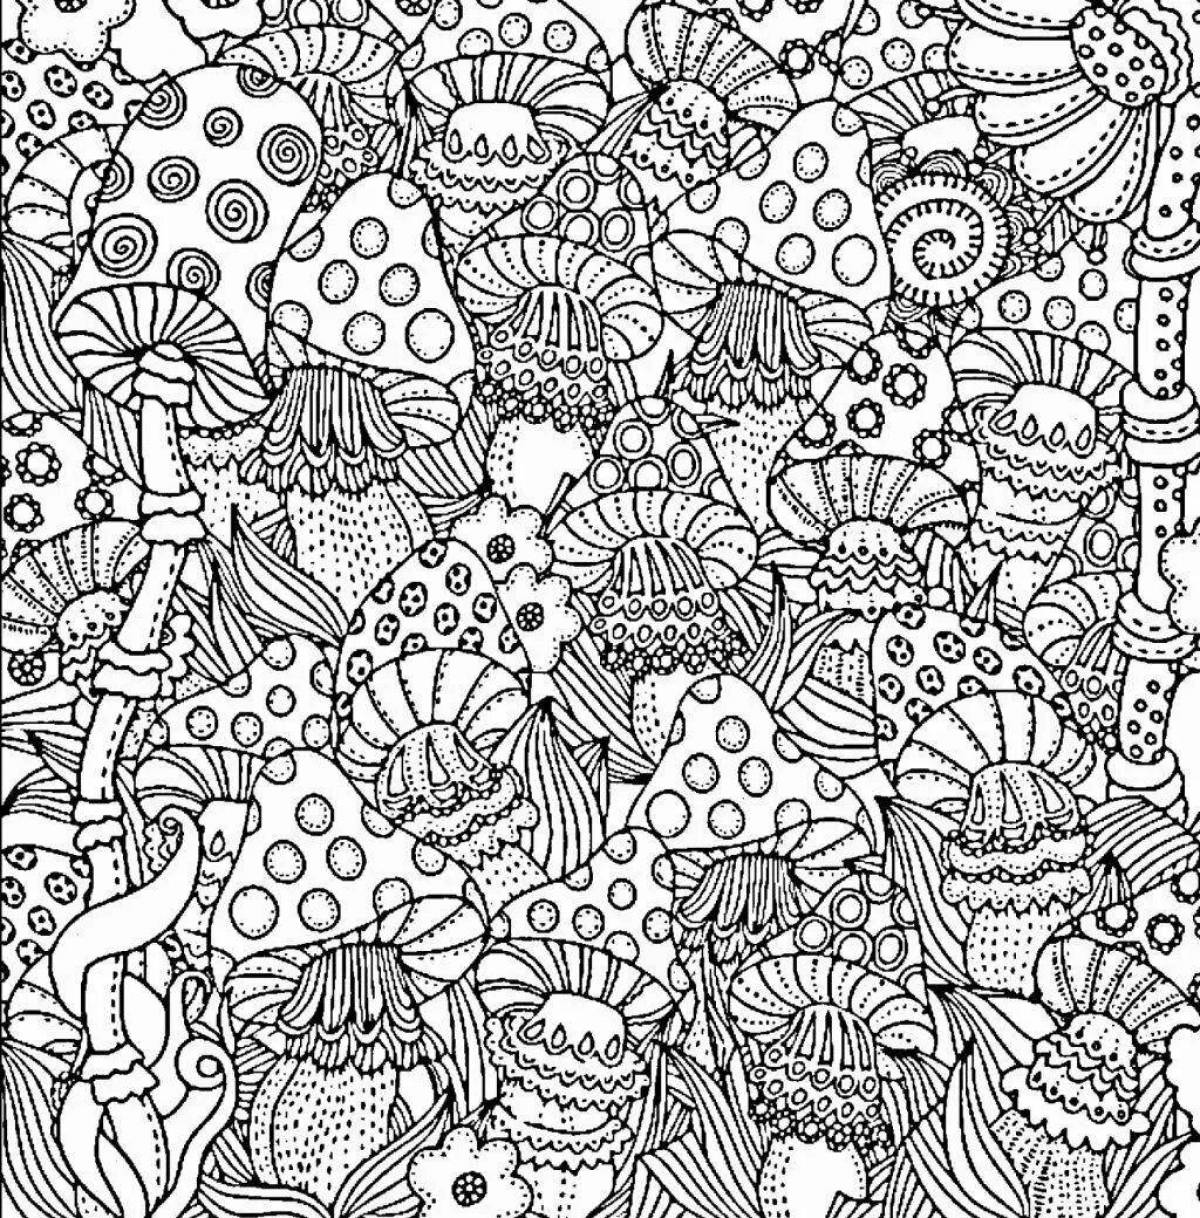 Amazing coloring pages little drawings